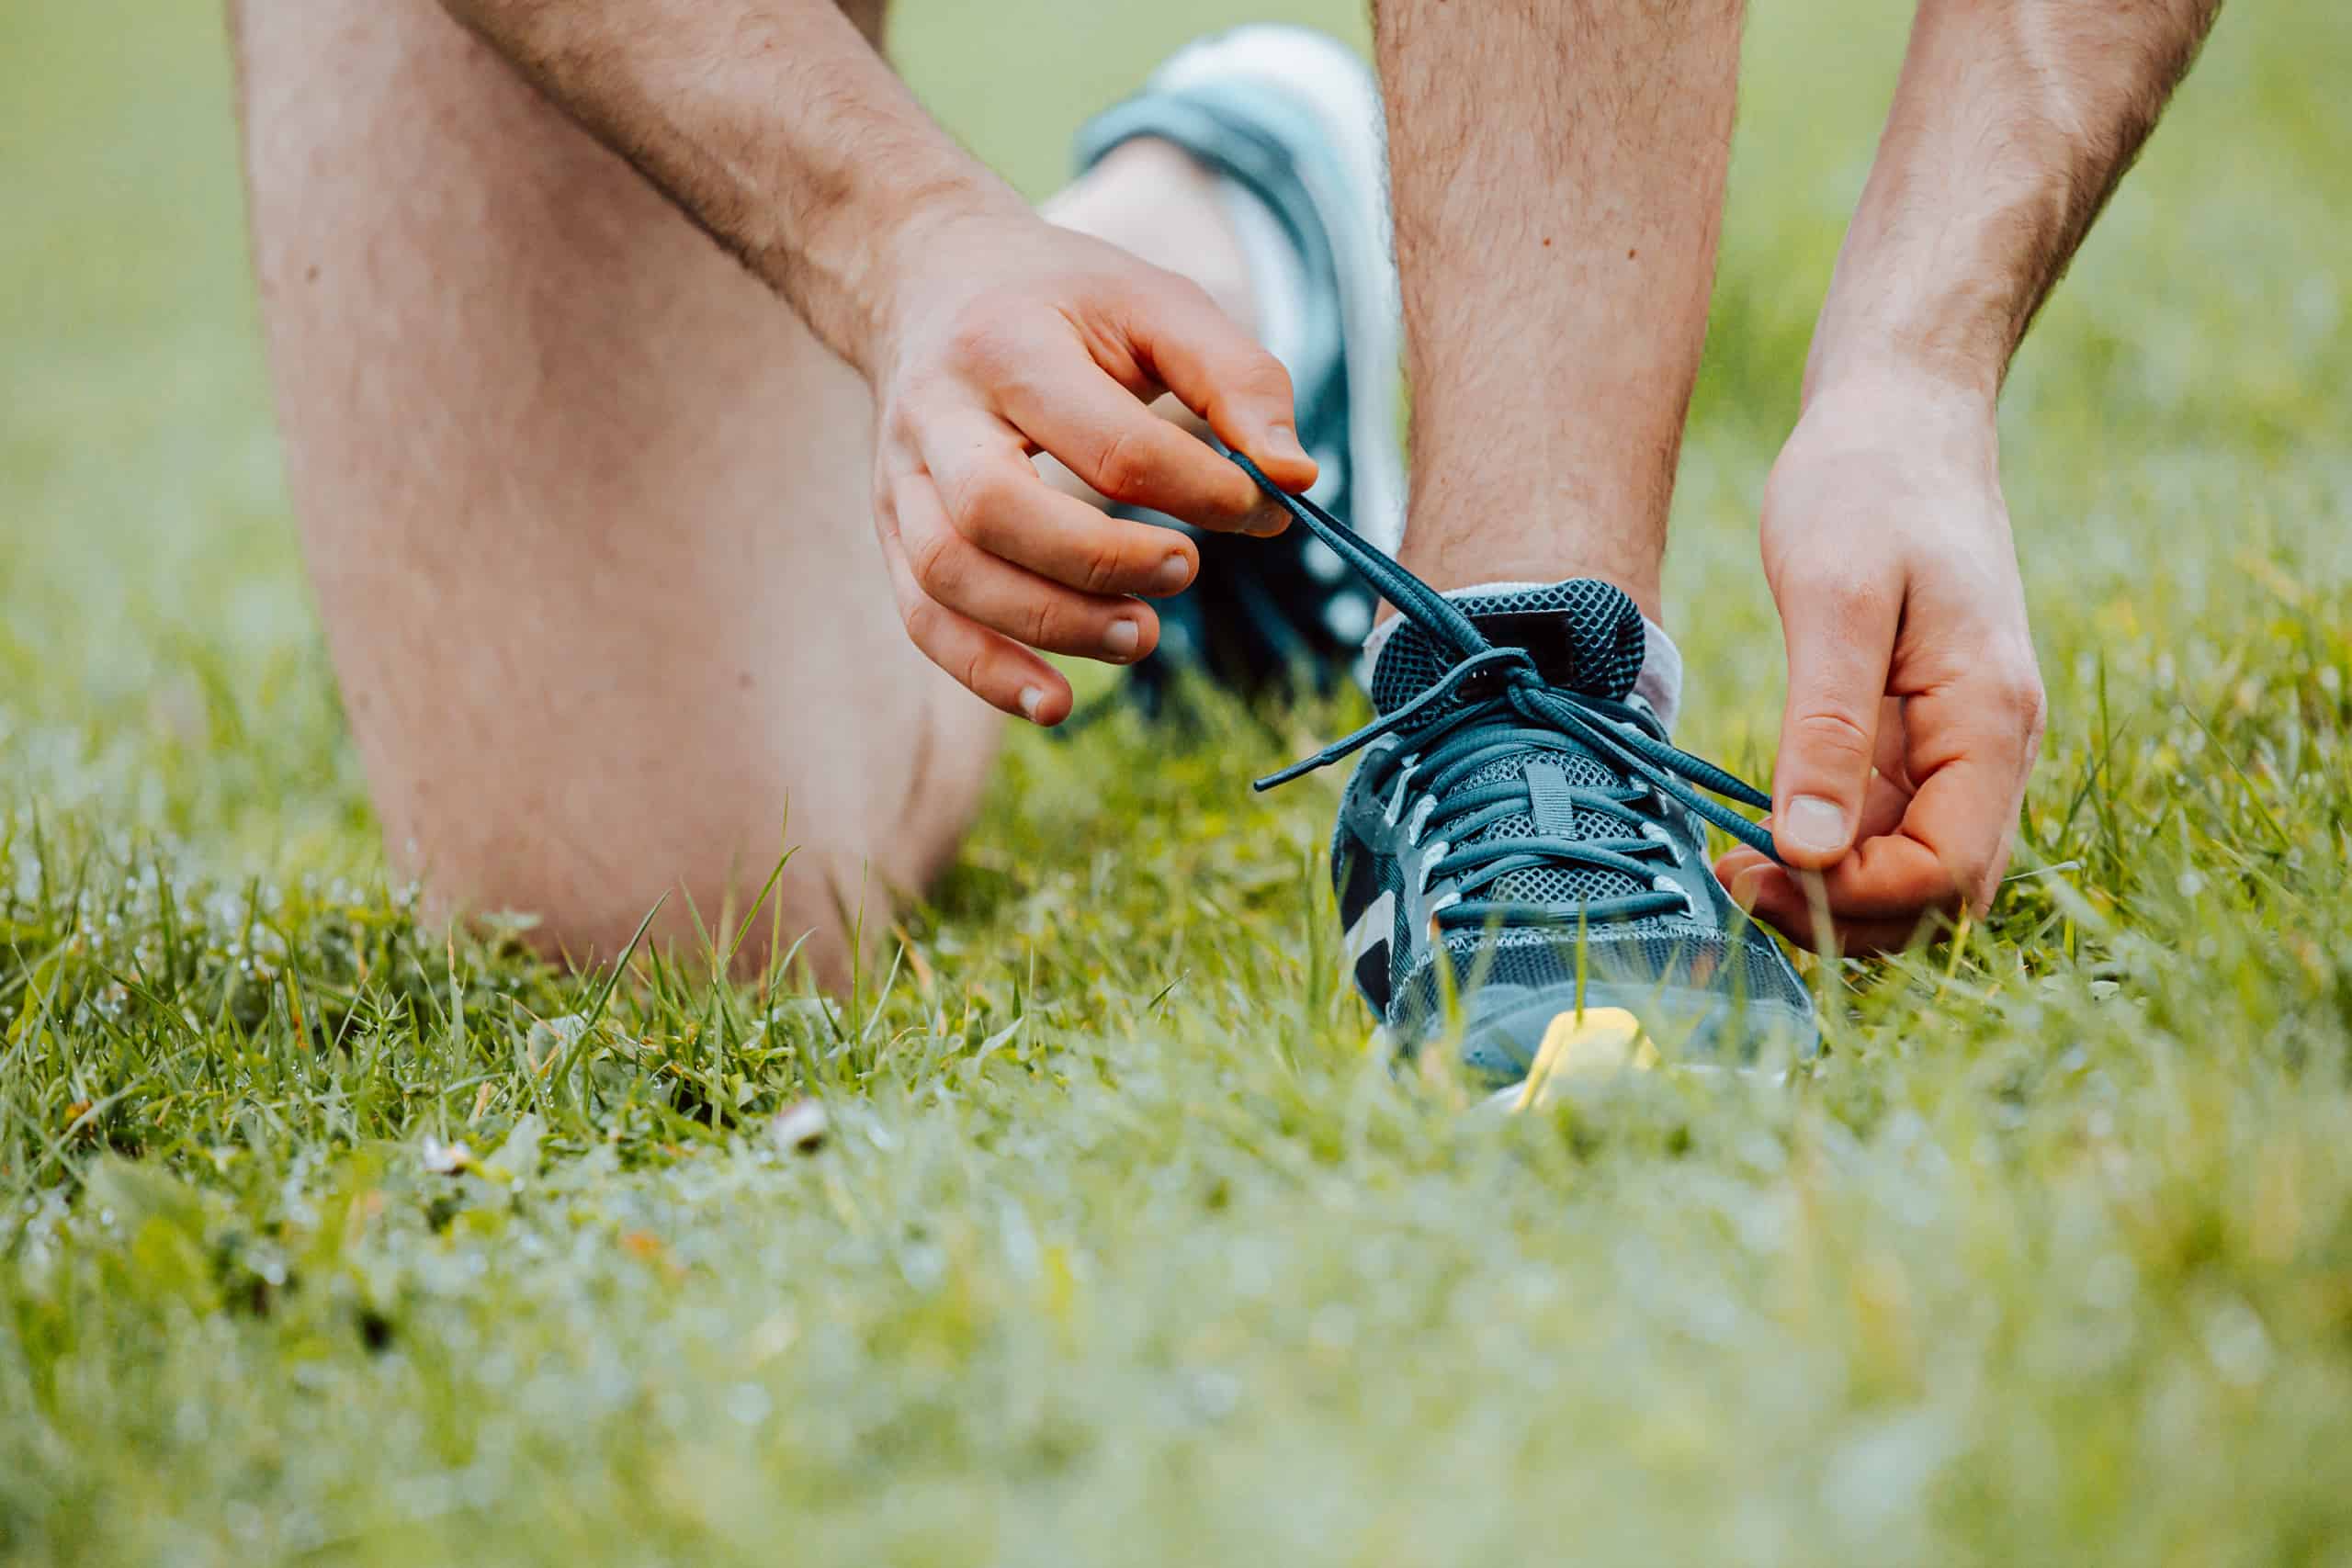 The Connection Between Footwear, Arch Support, and Back Pain